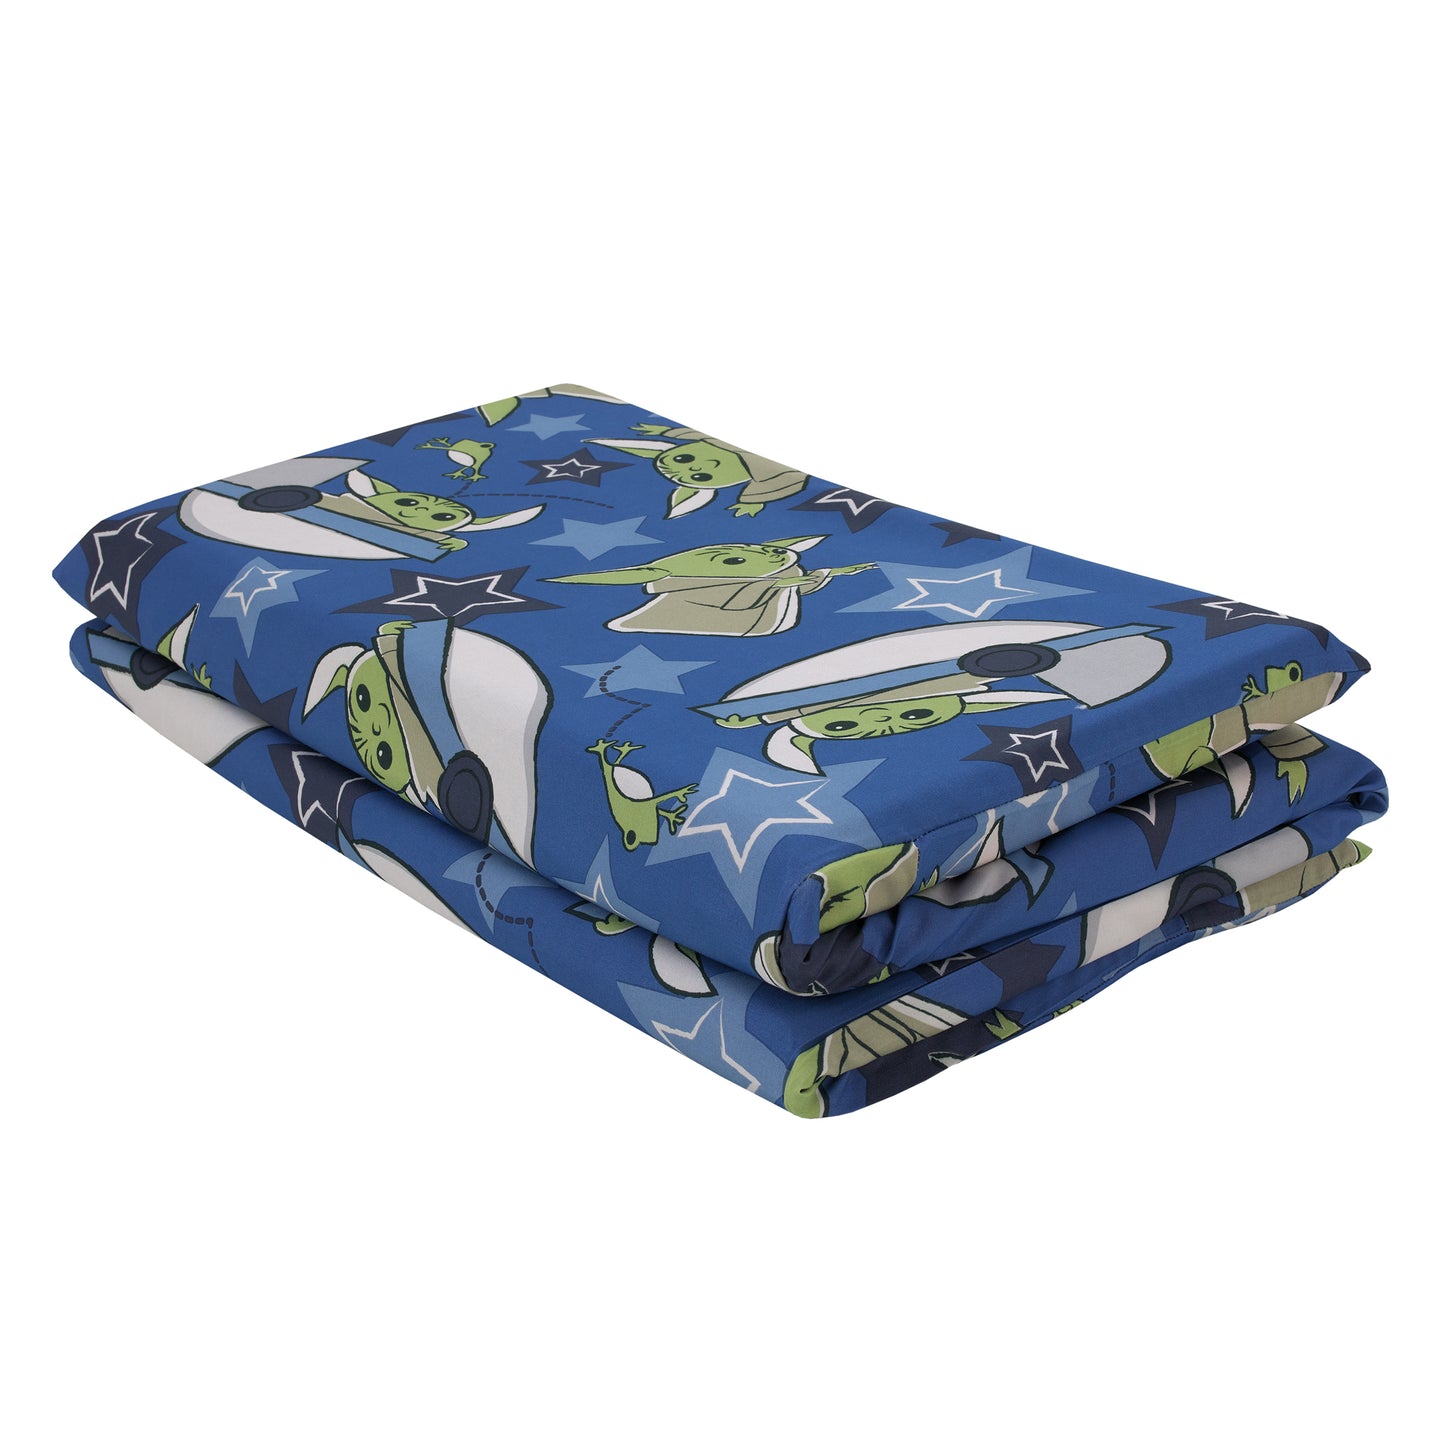 Star Wars The Child Cutest in the Galaxy Blue, Green and Gray Grogu, Hover Pod, and Stars Preschool Nap Pad Sheet